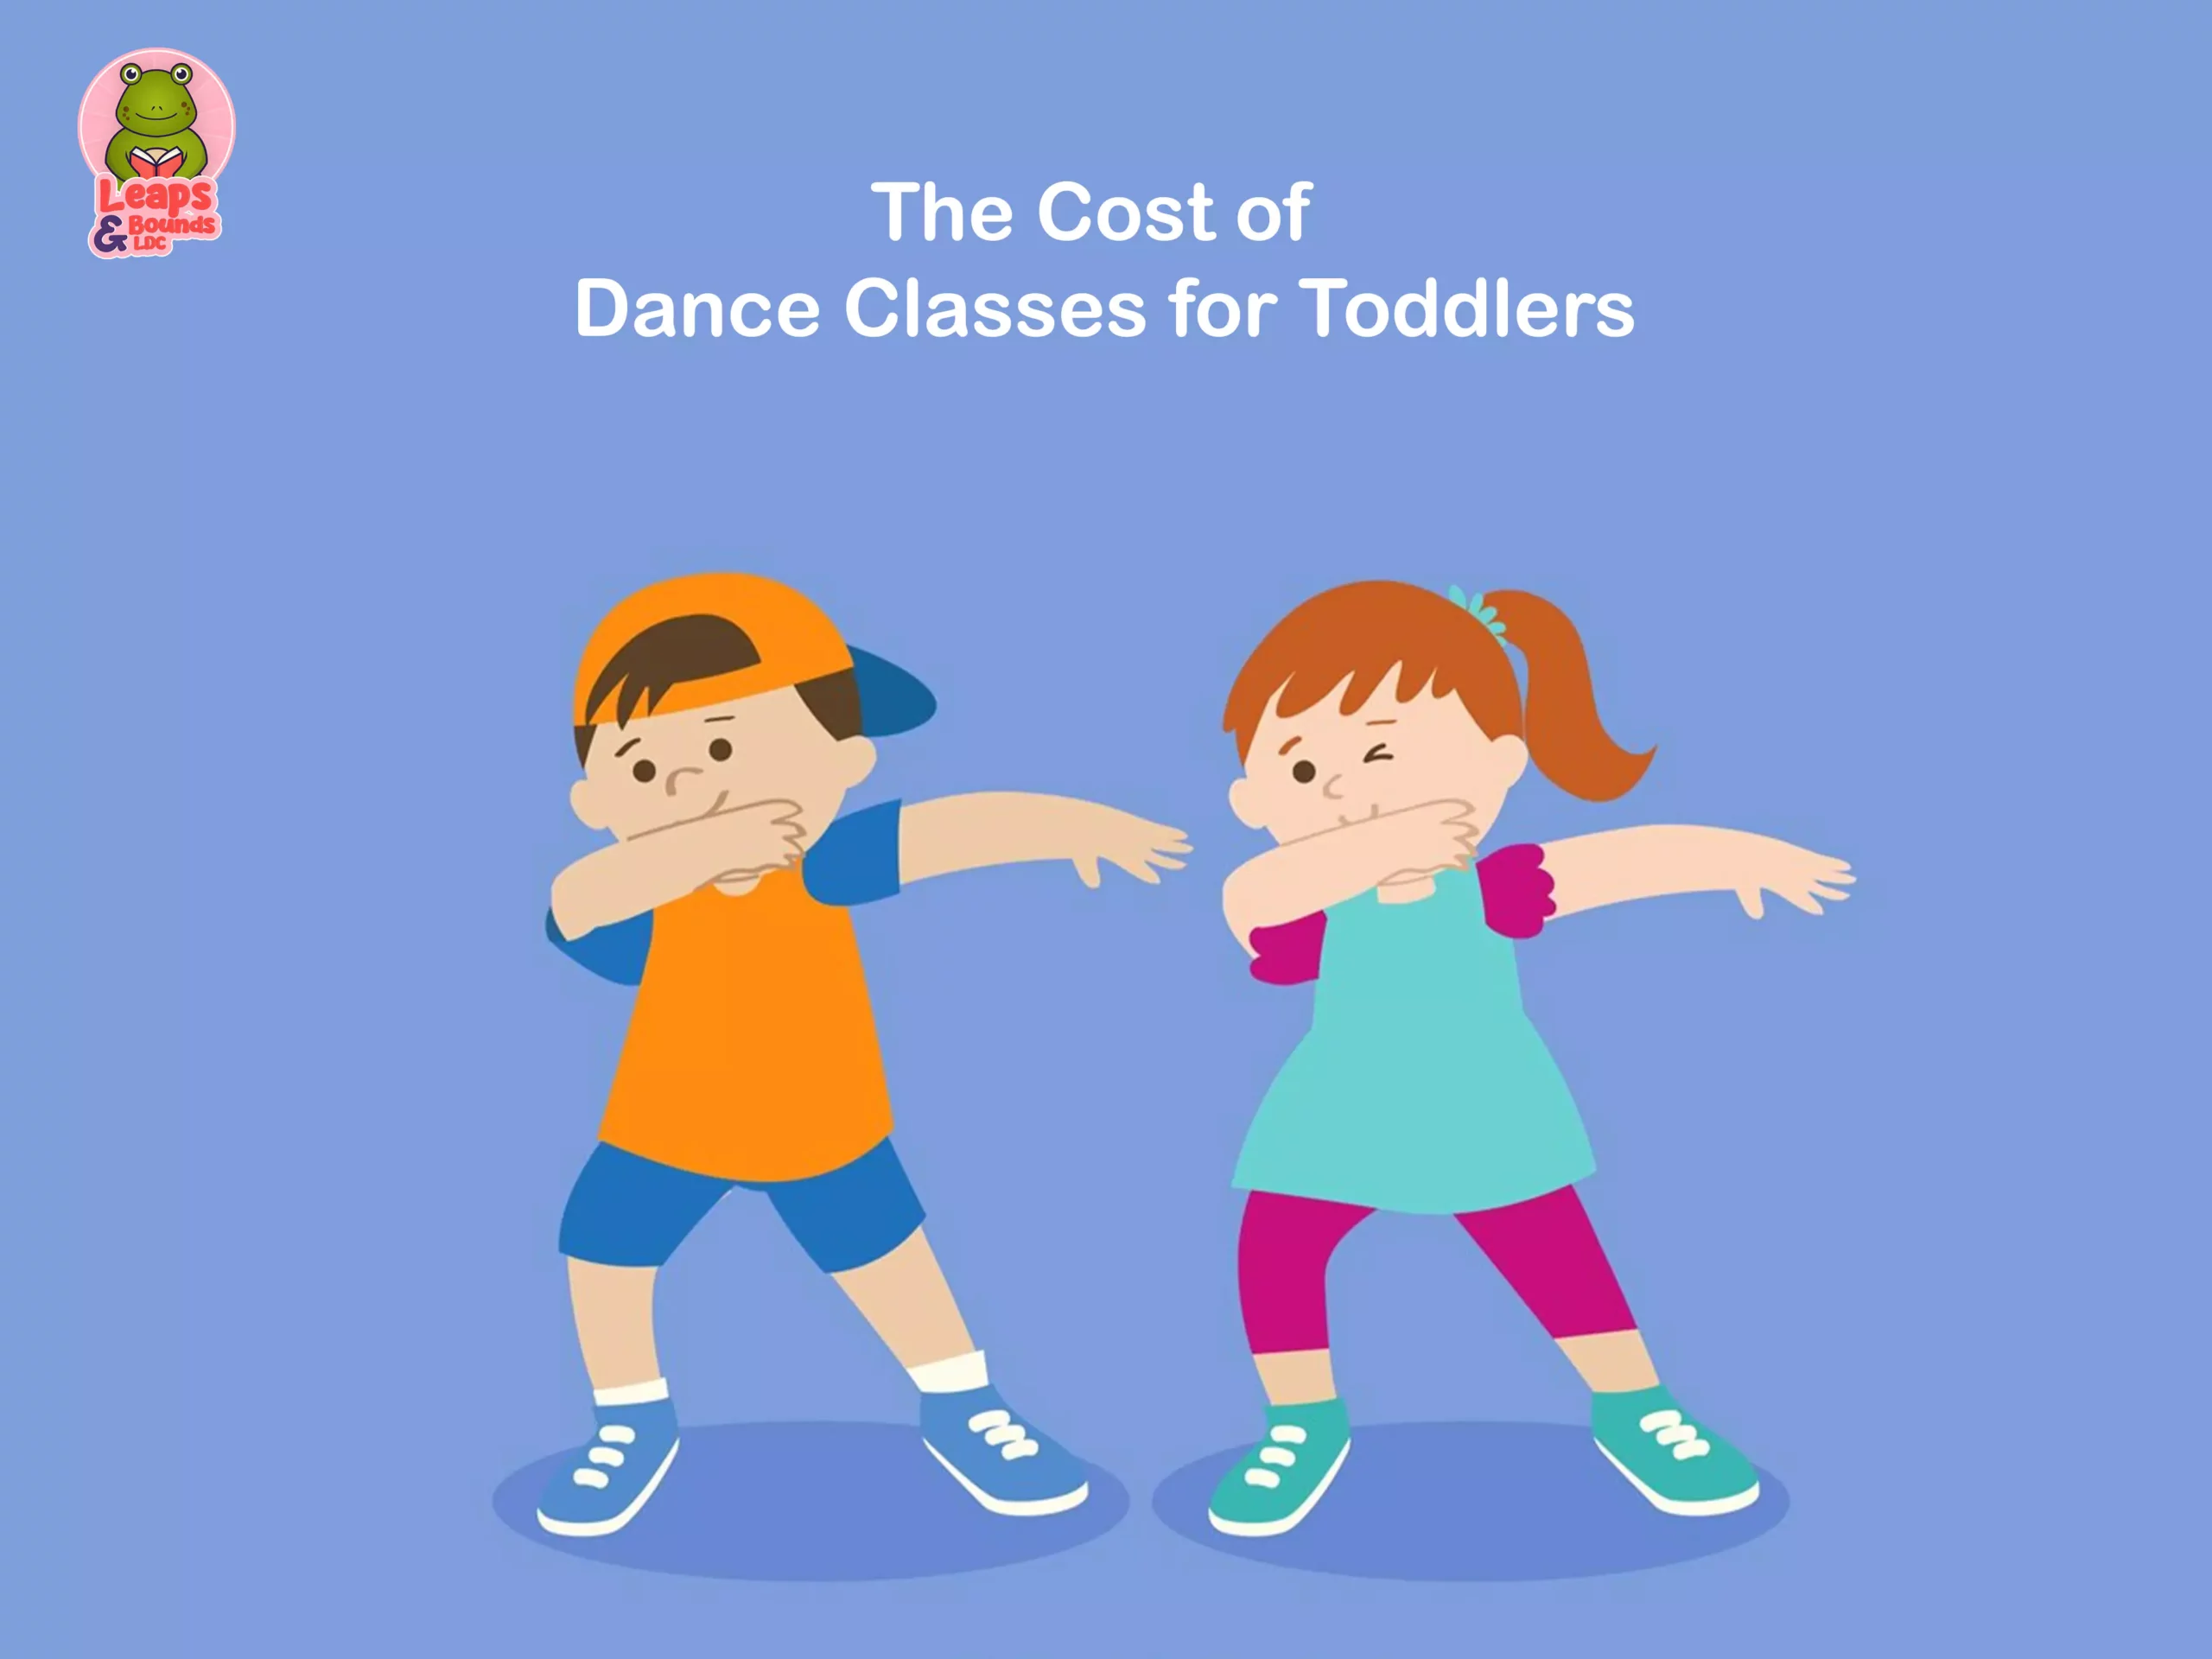 The Cost of Dance Classes for Toddlers